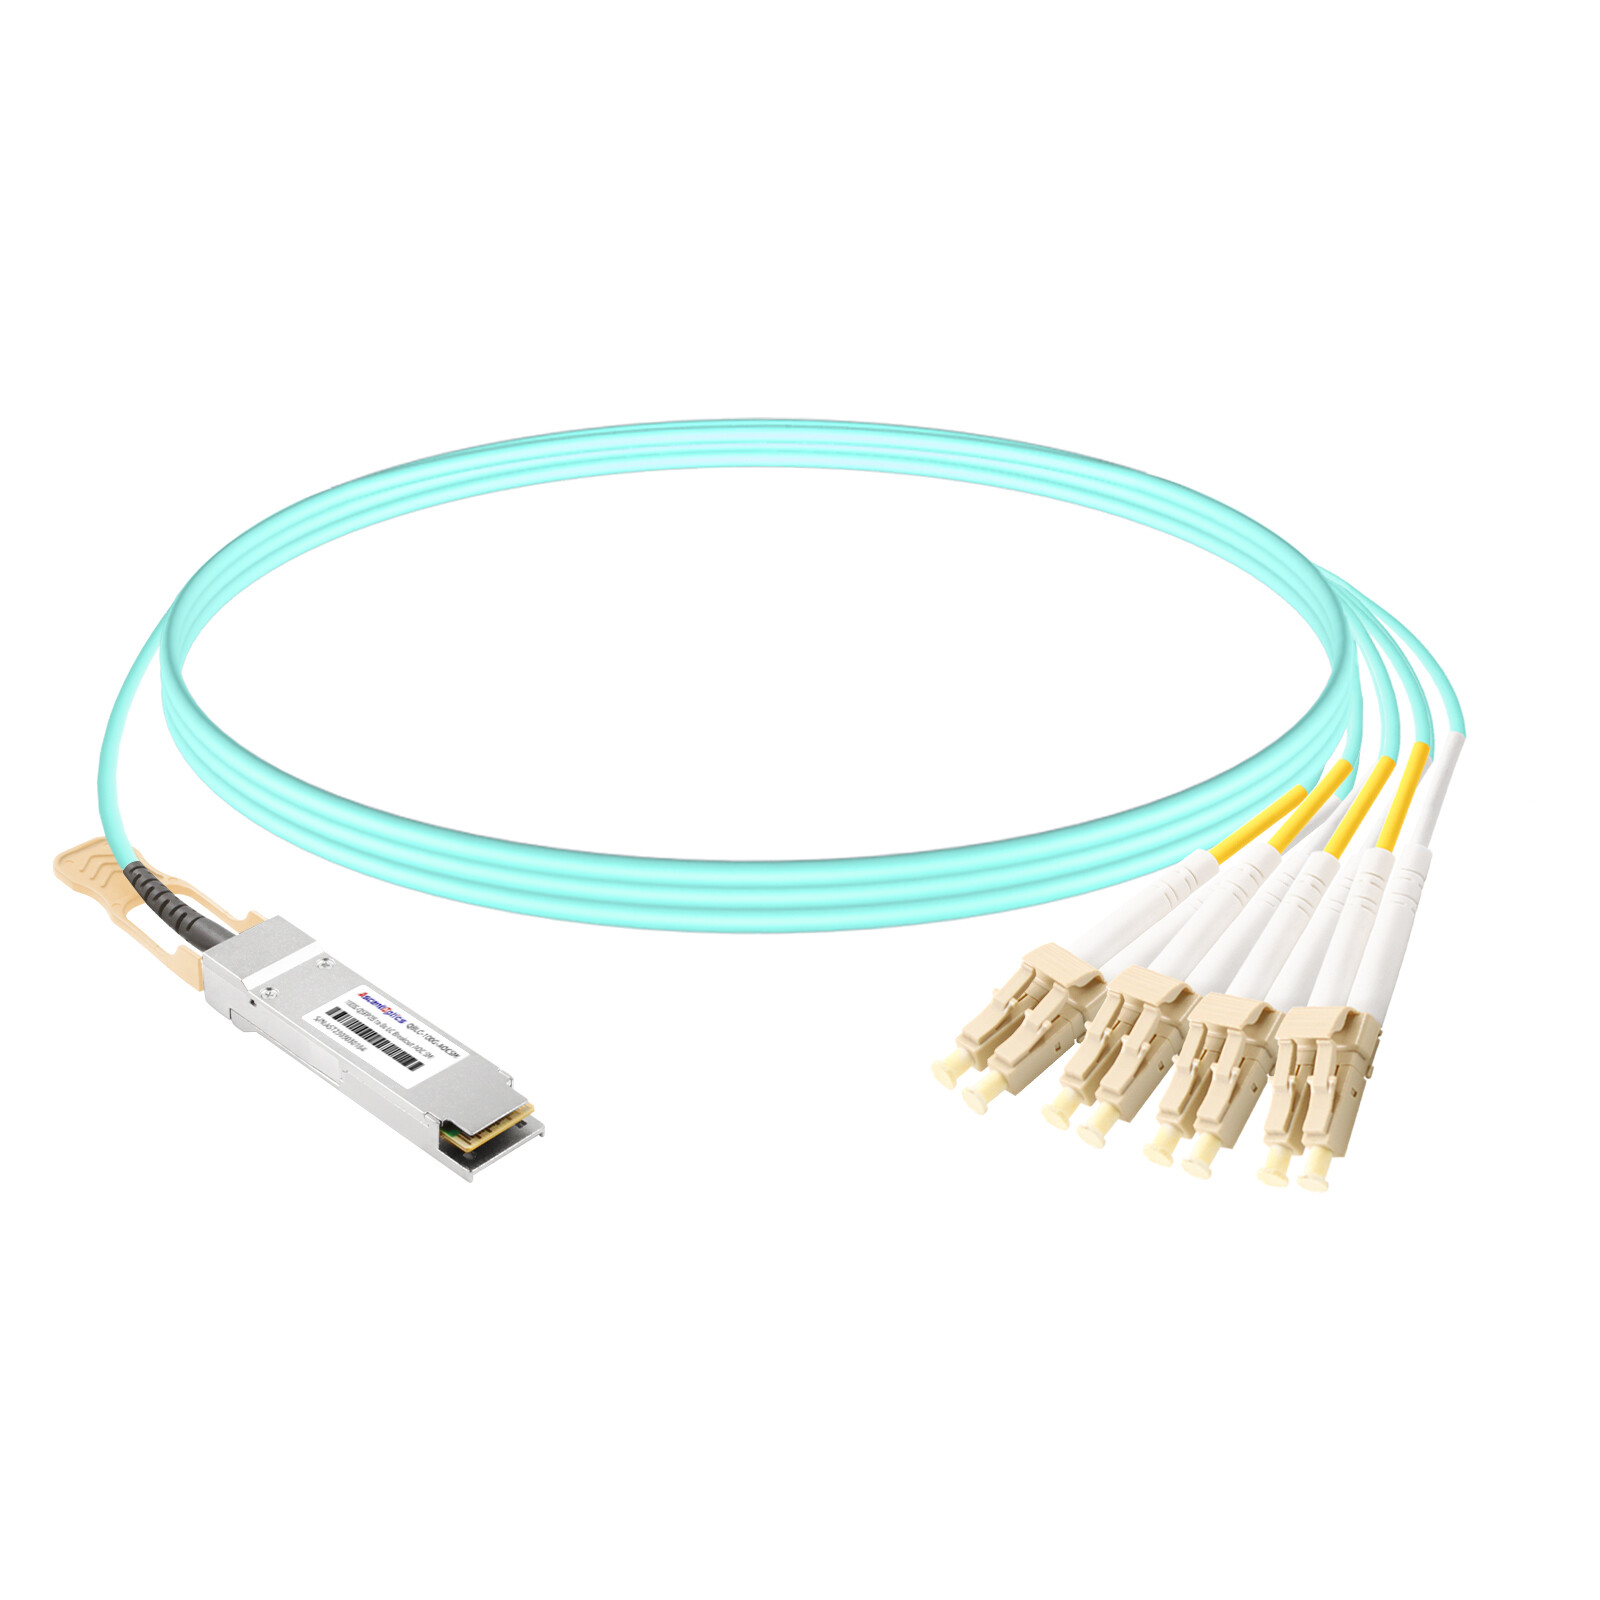 100G QSFP28 to 8x LC Breakout AOC Cable,5 Meters